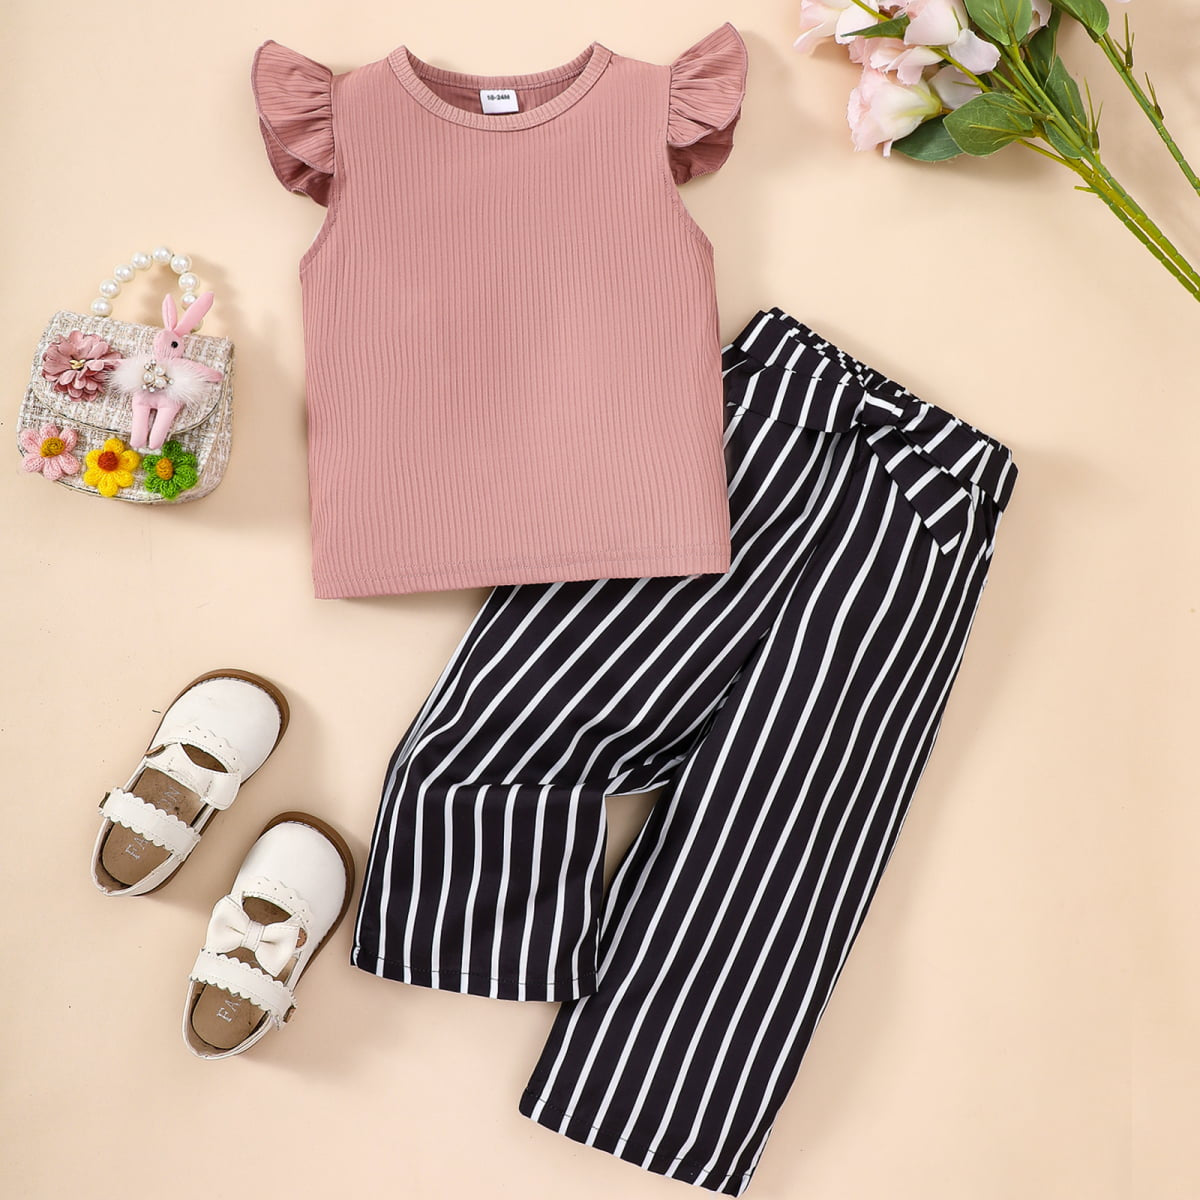 Uylee's Boutique Round Neck Butterfly Sleeve Top and Striped Pants Set